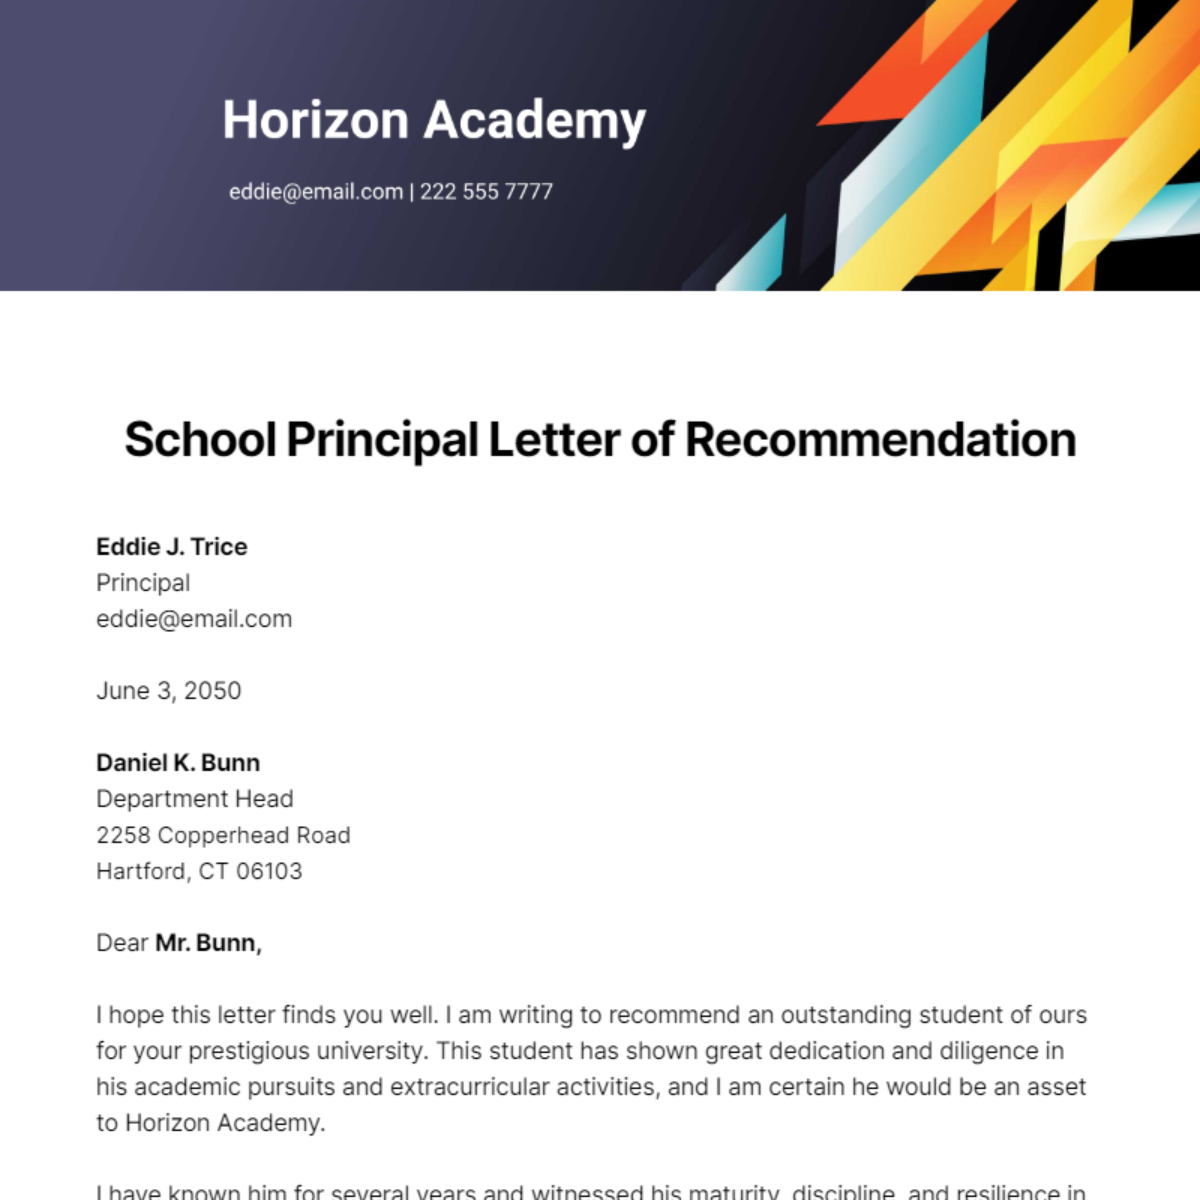 School Principal Letter of Recommendation Template